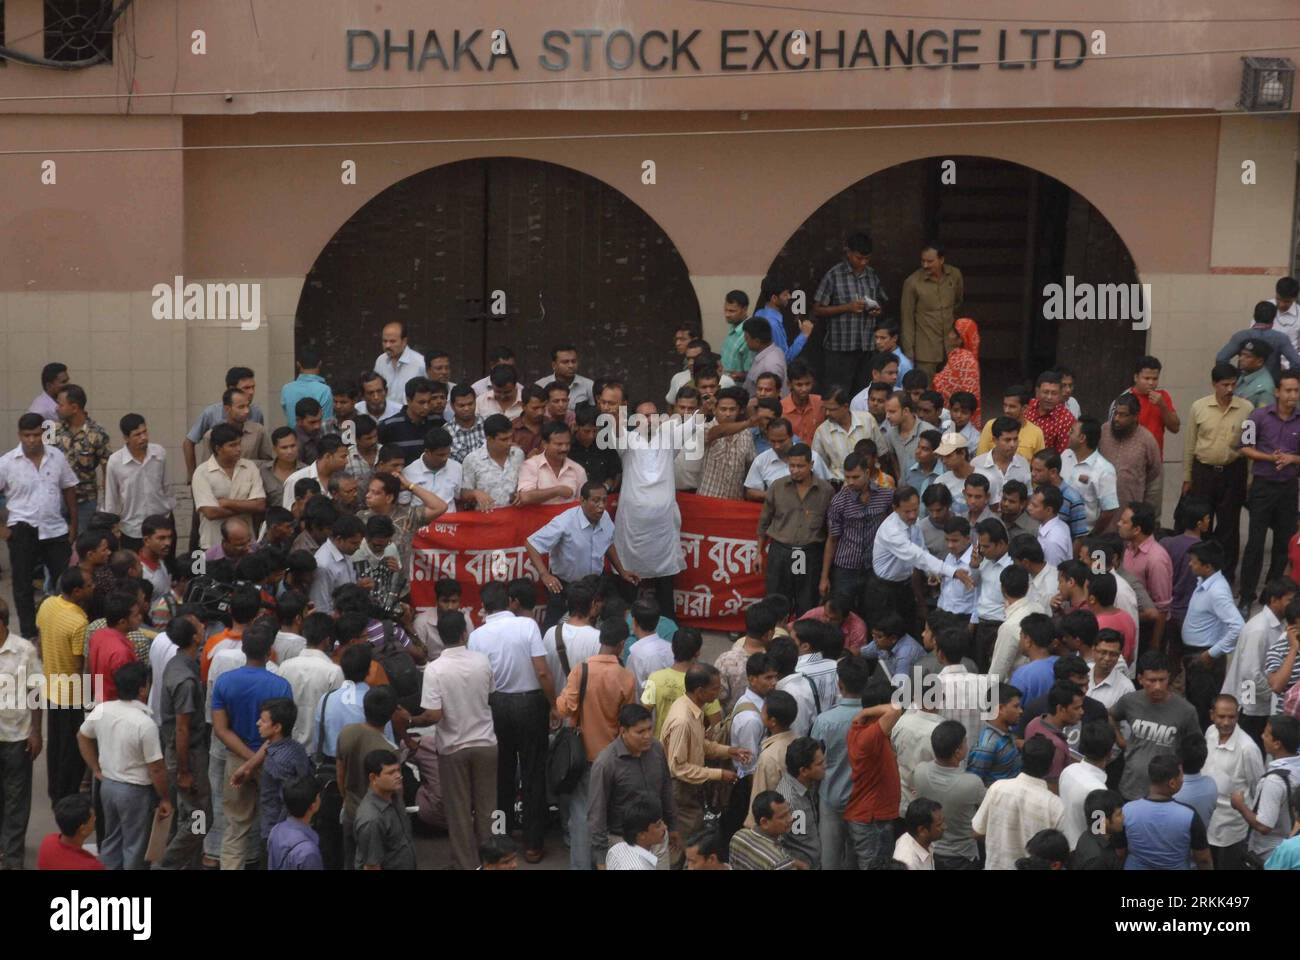 Bildnummer: 56196269  Datum: 19.10.2011  Copyright: imago/Xinhua (111019) -- DHAKA, Oct. 19, 2011 (Xinhua) -- Angry investors demonstrate in front of Dhaka Stock Exchange building in Dhaka, capital of Bangladesh, on Oct. 19, 2011. A group of small investors continued their demonstration in front of Bangladesh s main bourse building in Dhaka on Sunday, protesting steep fall in prices. (Xinhua/Shariful Islam) BANGLADESH-DHAKA-INVESTORS PROTEST PUBLICATIONxNOTxINxCHN Gesellschaft Wirtschaft Börse Demo Protest Inflation Preisverfall premiumd xbs x0x 2011 quer      56196269 Date 19 10 2011 Copyrigh Stock Photo